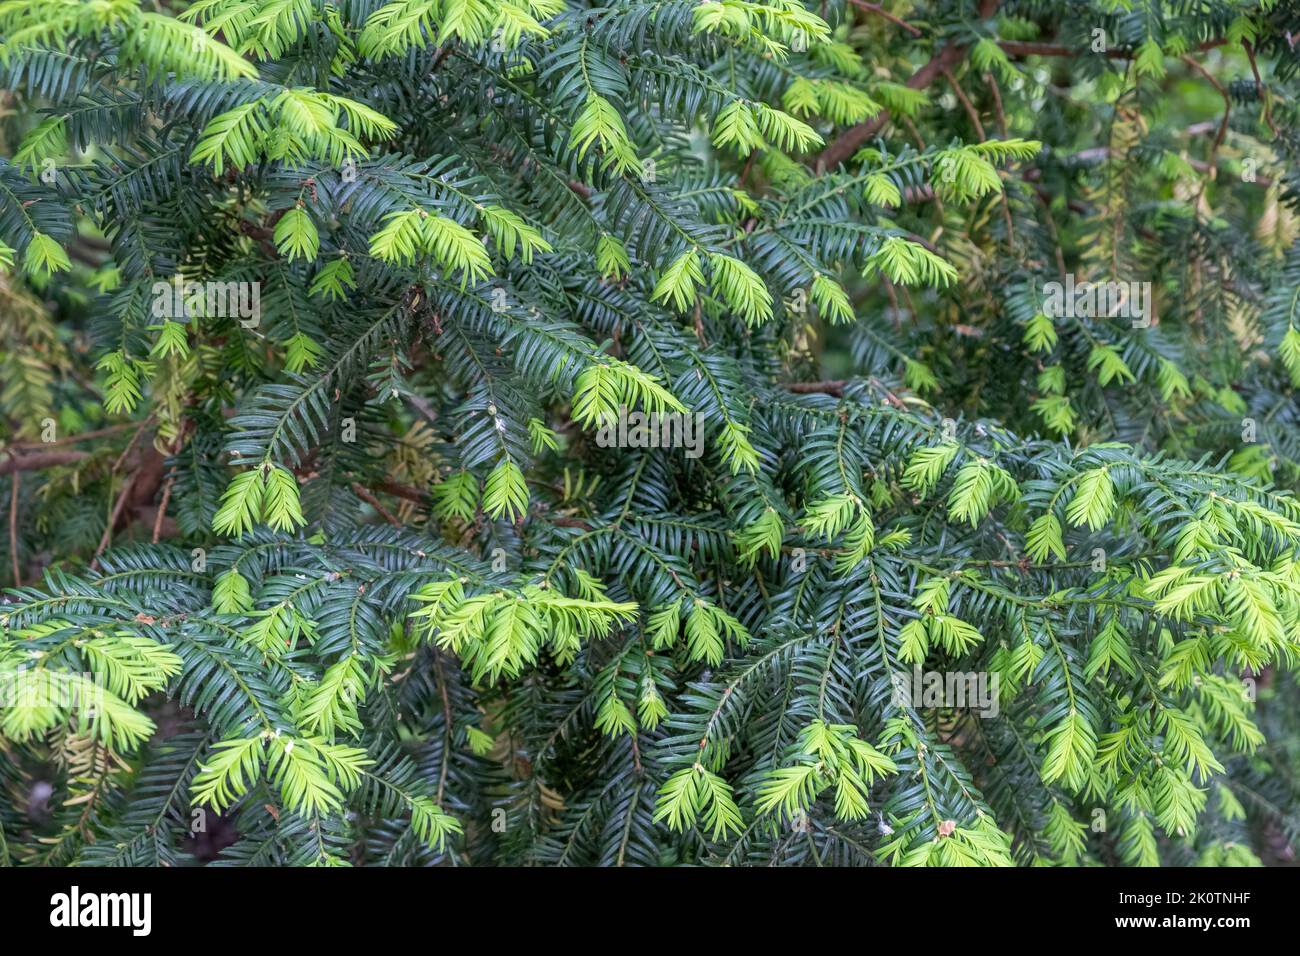 Amsterdam, Vondel Park at Netherlands. Tsuga canadensis or eastern hemlock a coniferous ornamental green tree. Full background texture. Nature at Holl Stock Photo